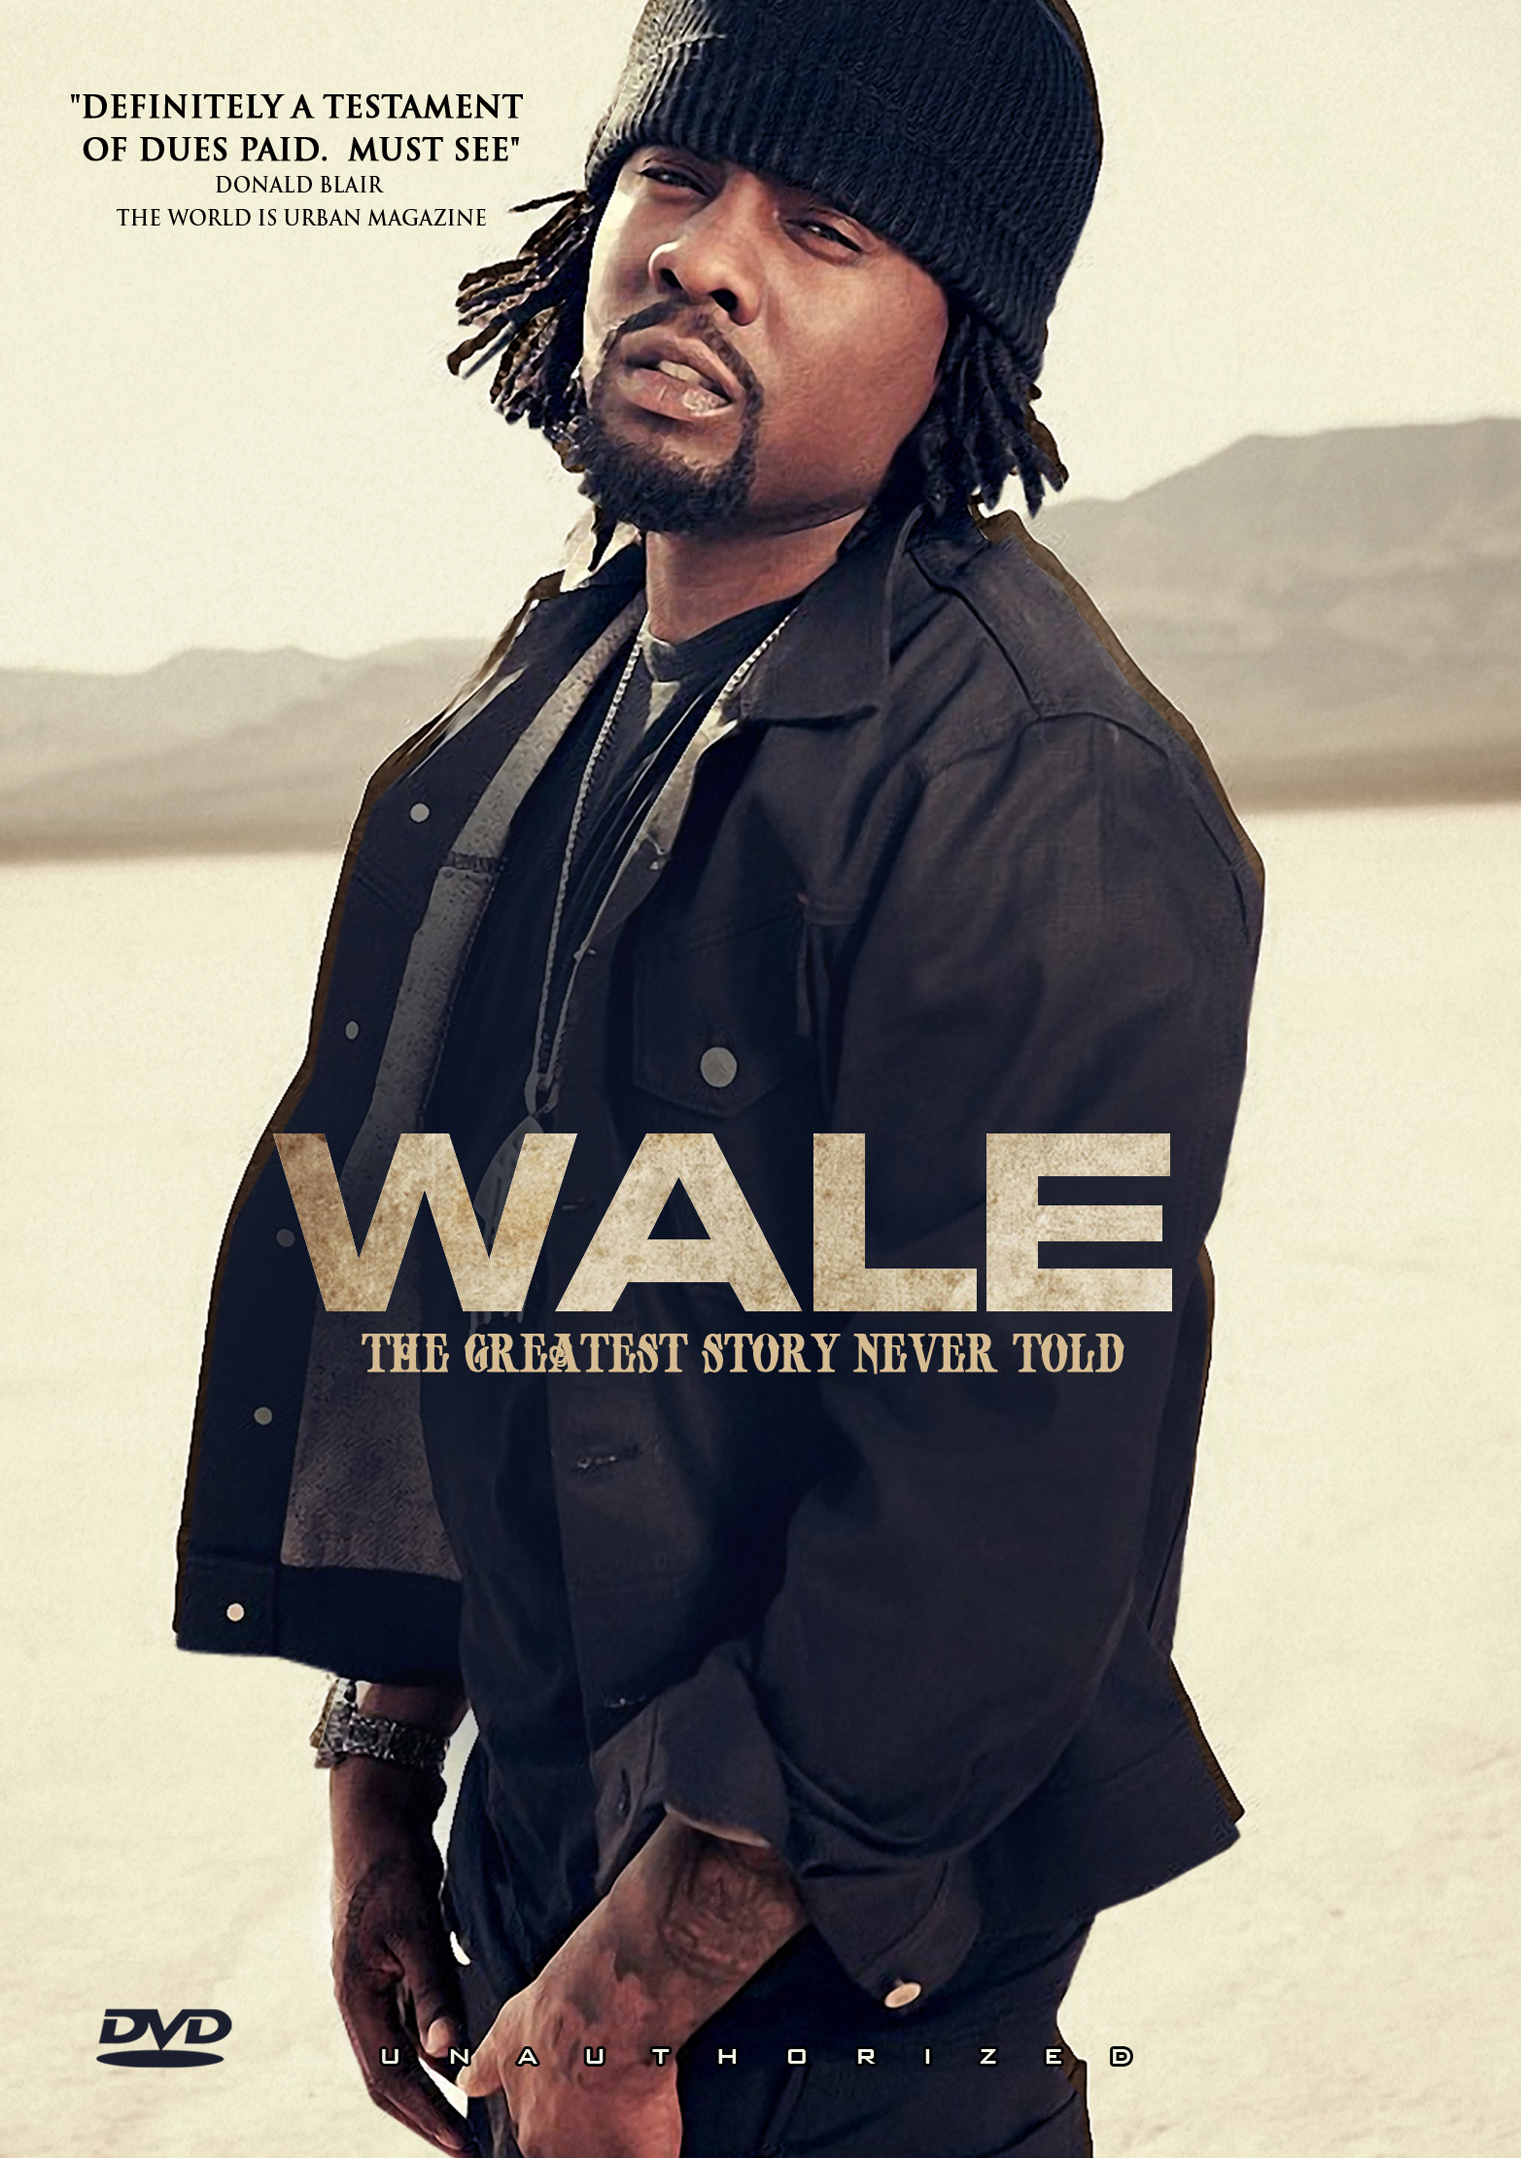 The great story never told. The Greatest story never told. Wale.